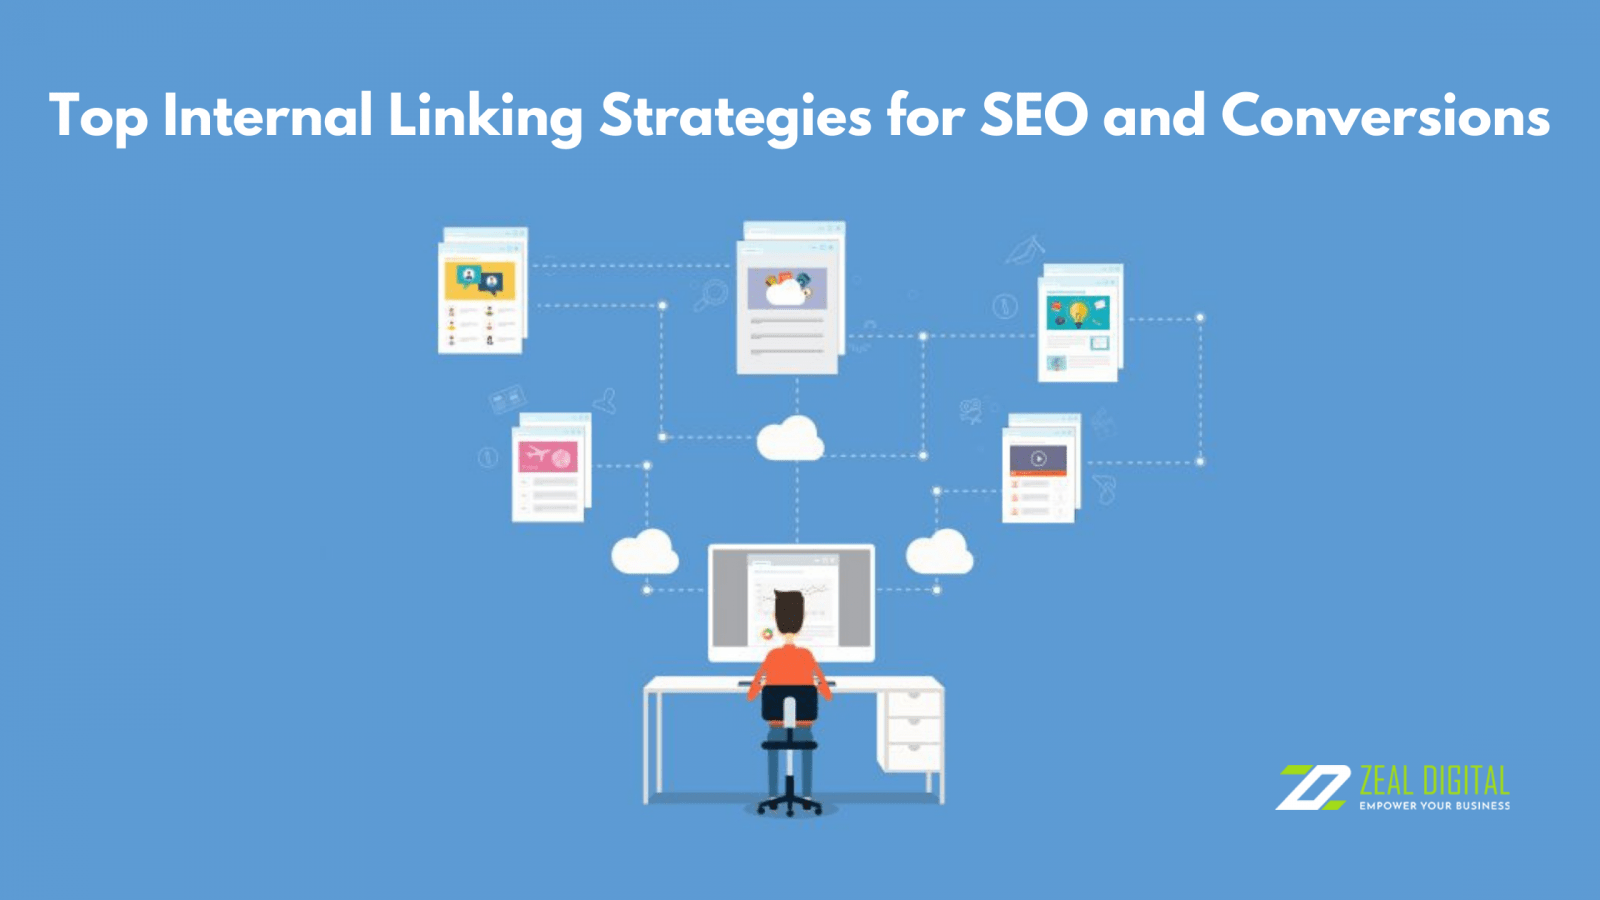 Top Internal Linking Strategies for SEO and Conversions